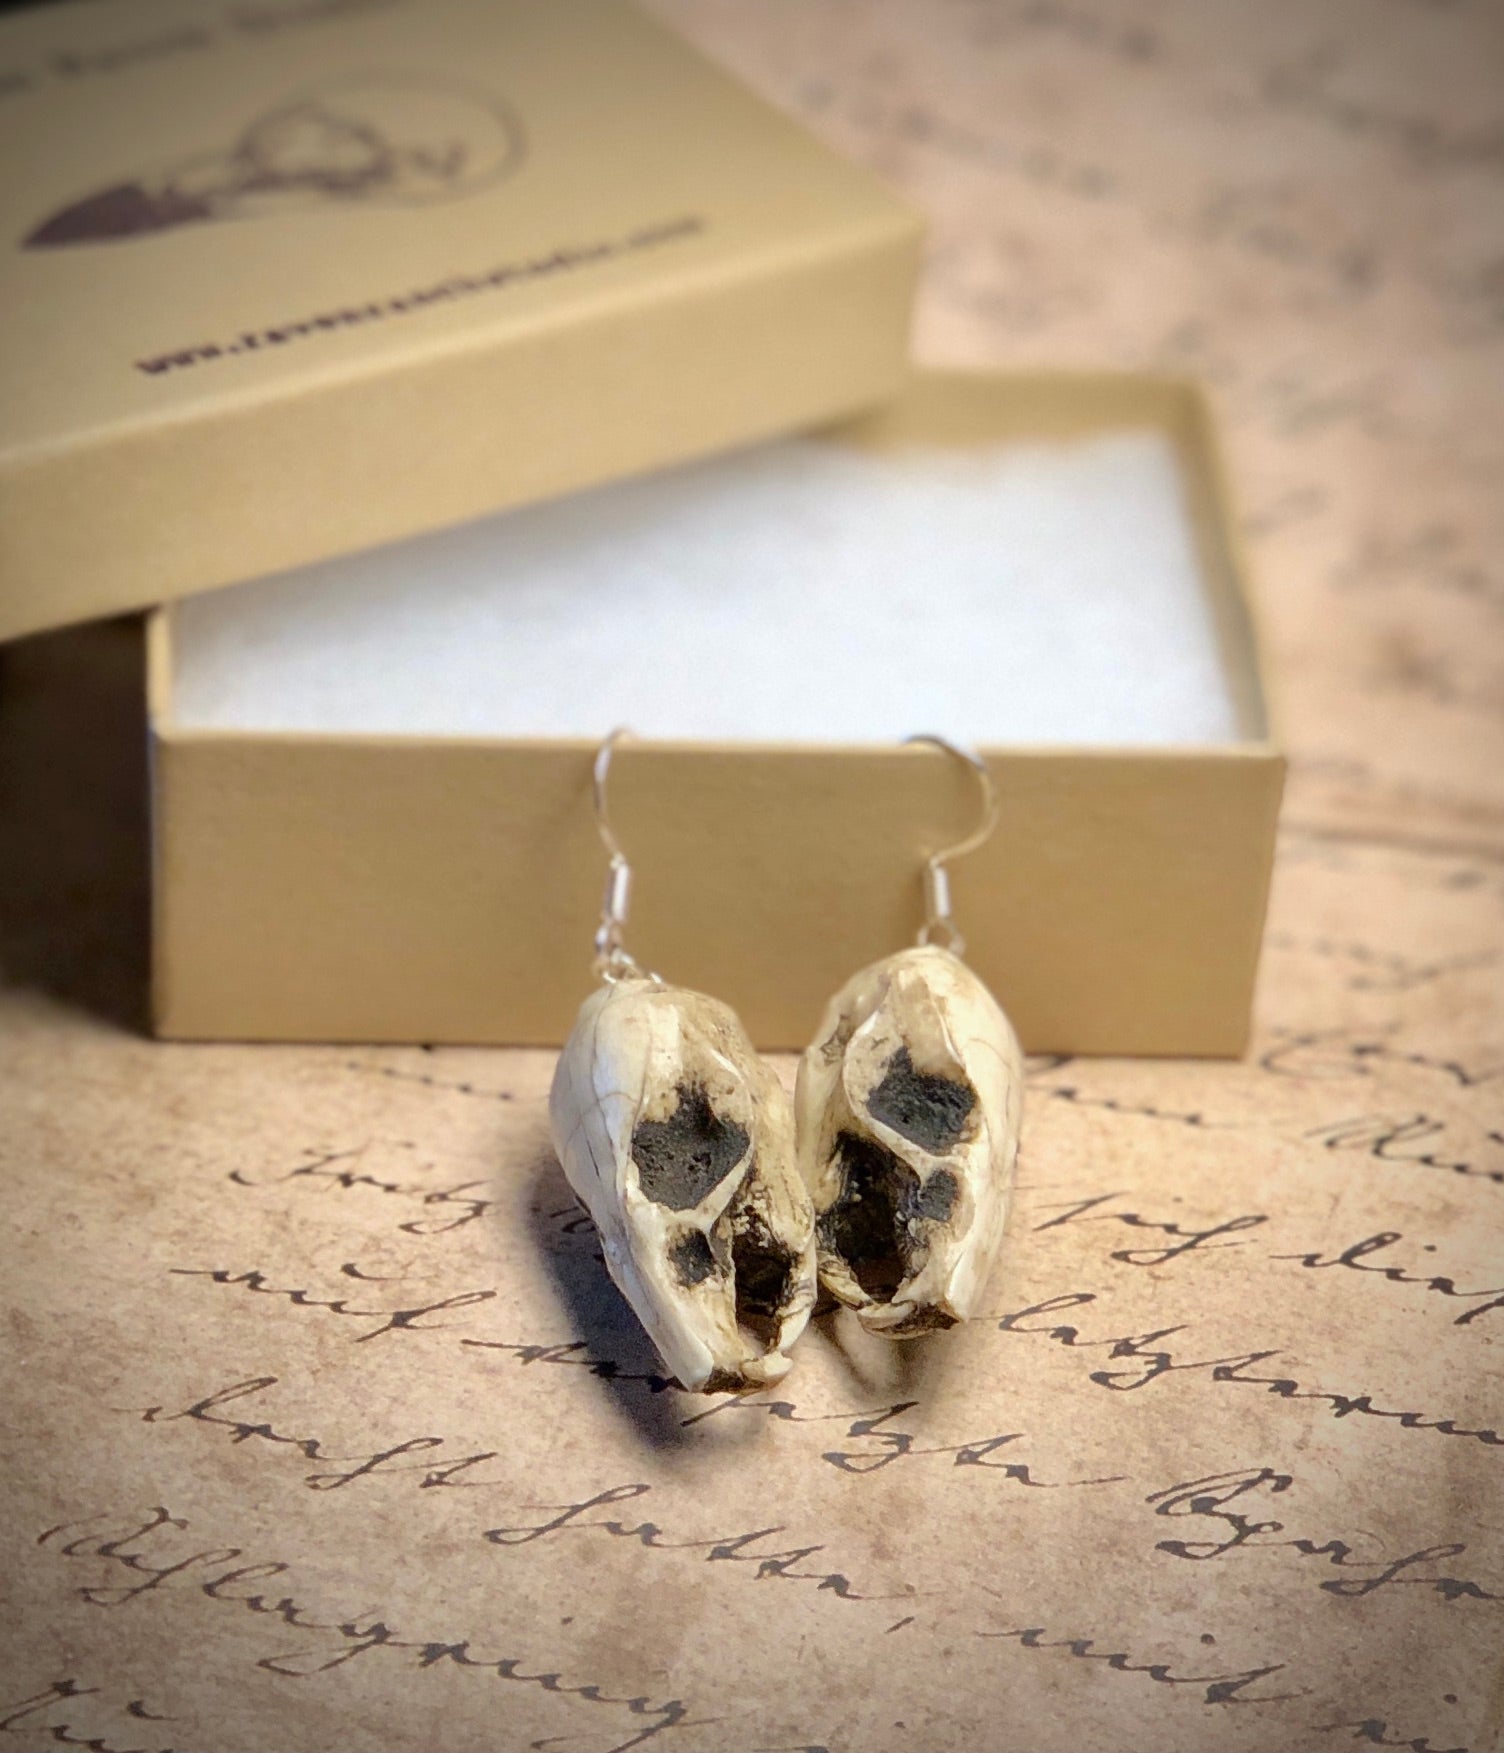 Rodent skull Aged finish resin rat skull dangle earrings for goths that love bones, creepy accessories, witchy pagan jewelry.